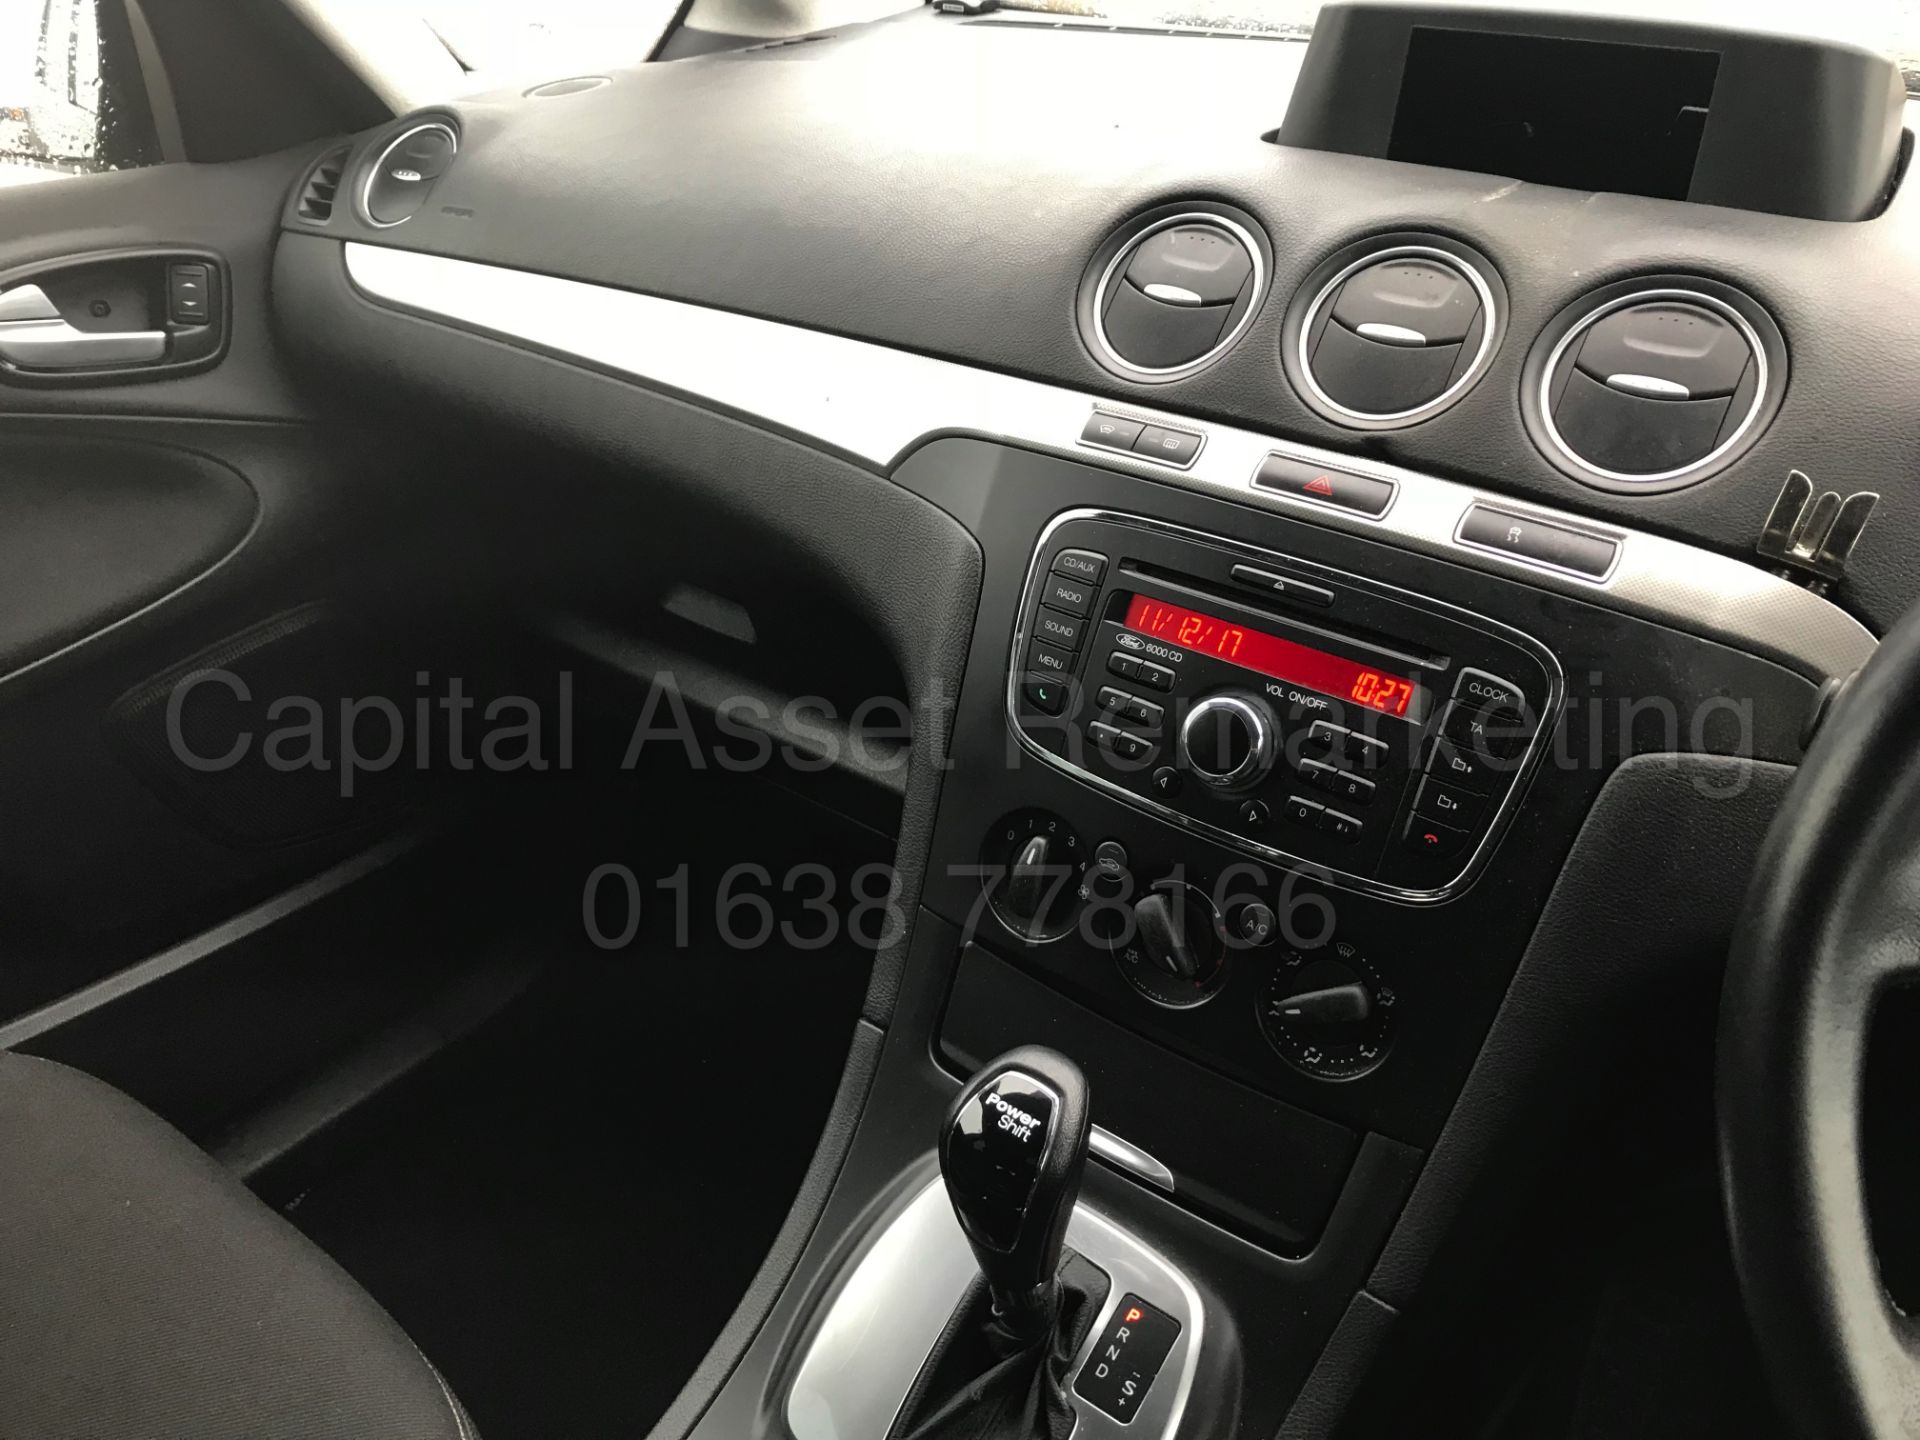 ON SALE FORD GALAXY 'ZETEC' 7 SEATER (2014 - 14 REG) 2.0 TDCI - 140 BHP POWER SHIFT (1 OWNER) FSH!!! - Image 23 of 30